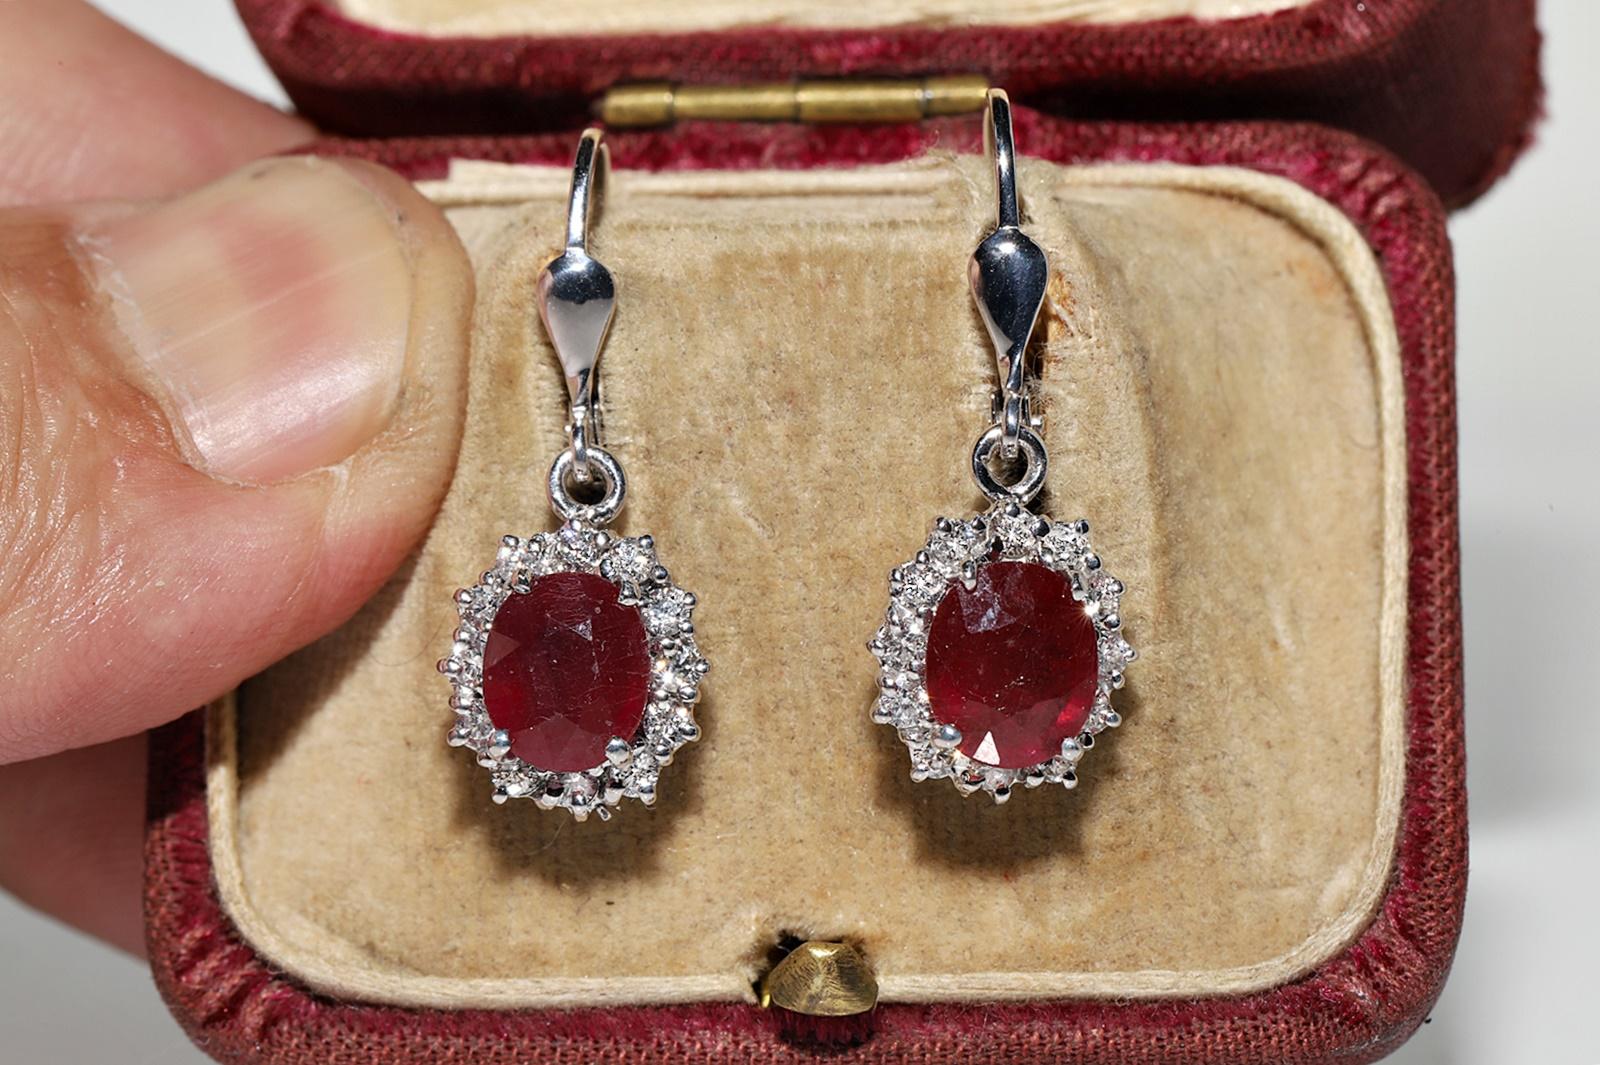 In very good condition.
Total weight 5.2 grams.
Totally is diamond 1 ct.
The diamond is has G-H color and vvs-vs clarity.
Totally is ruby 2 ct.
Box is not included.
Please contact for any questions.